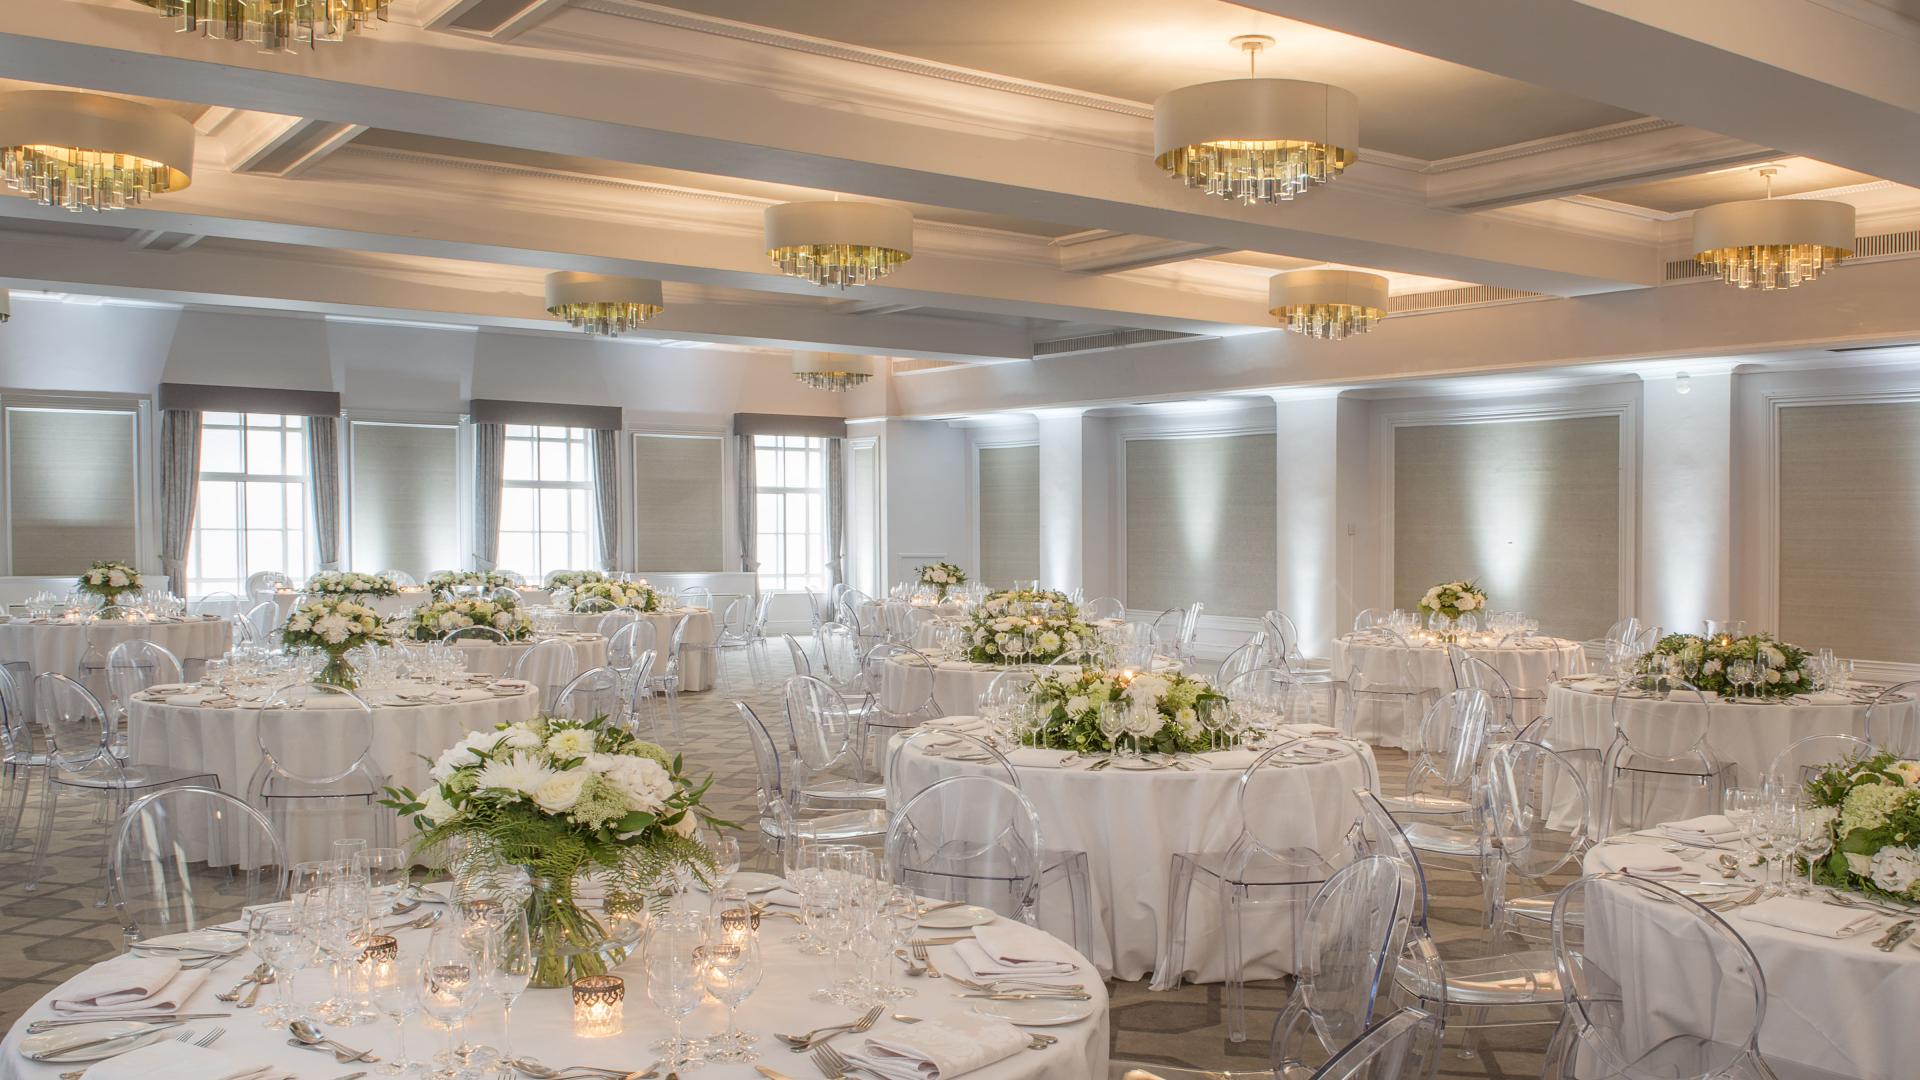 Wedding Reception Venues for Hire in Central London